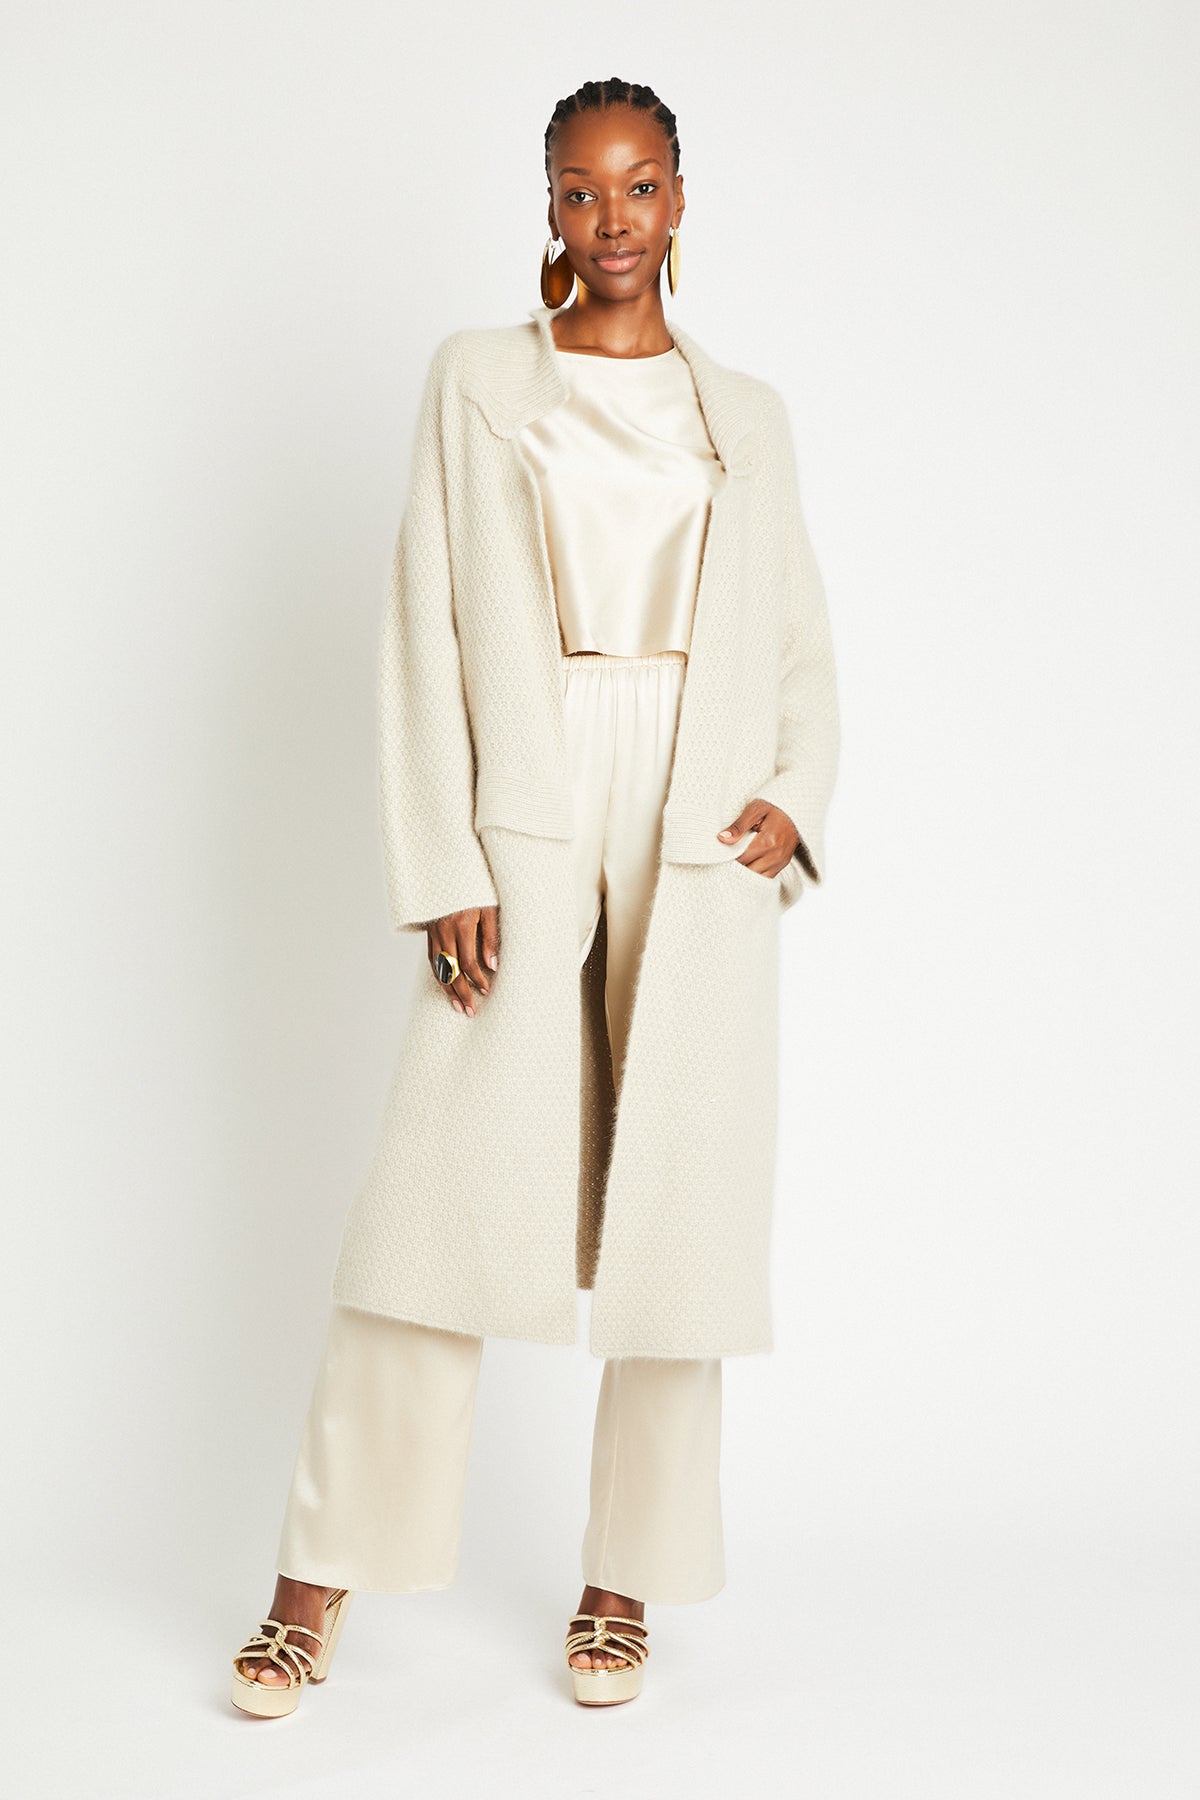 + Beryll Marianne Cashmere Coat | Shell Beach - + Beryll Marianne Cashmere Coat | Shell Beach - +Beryll Worn By Good People